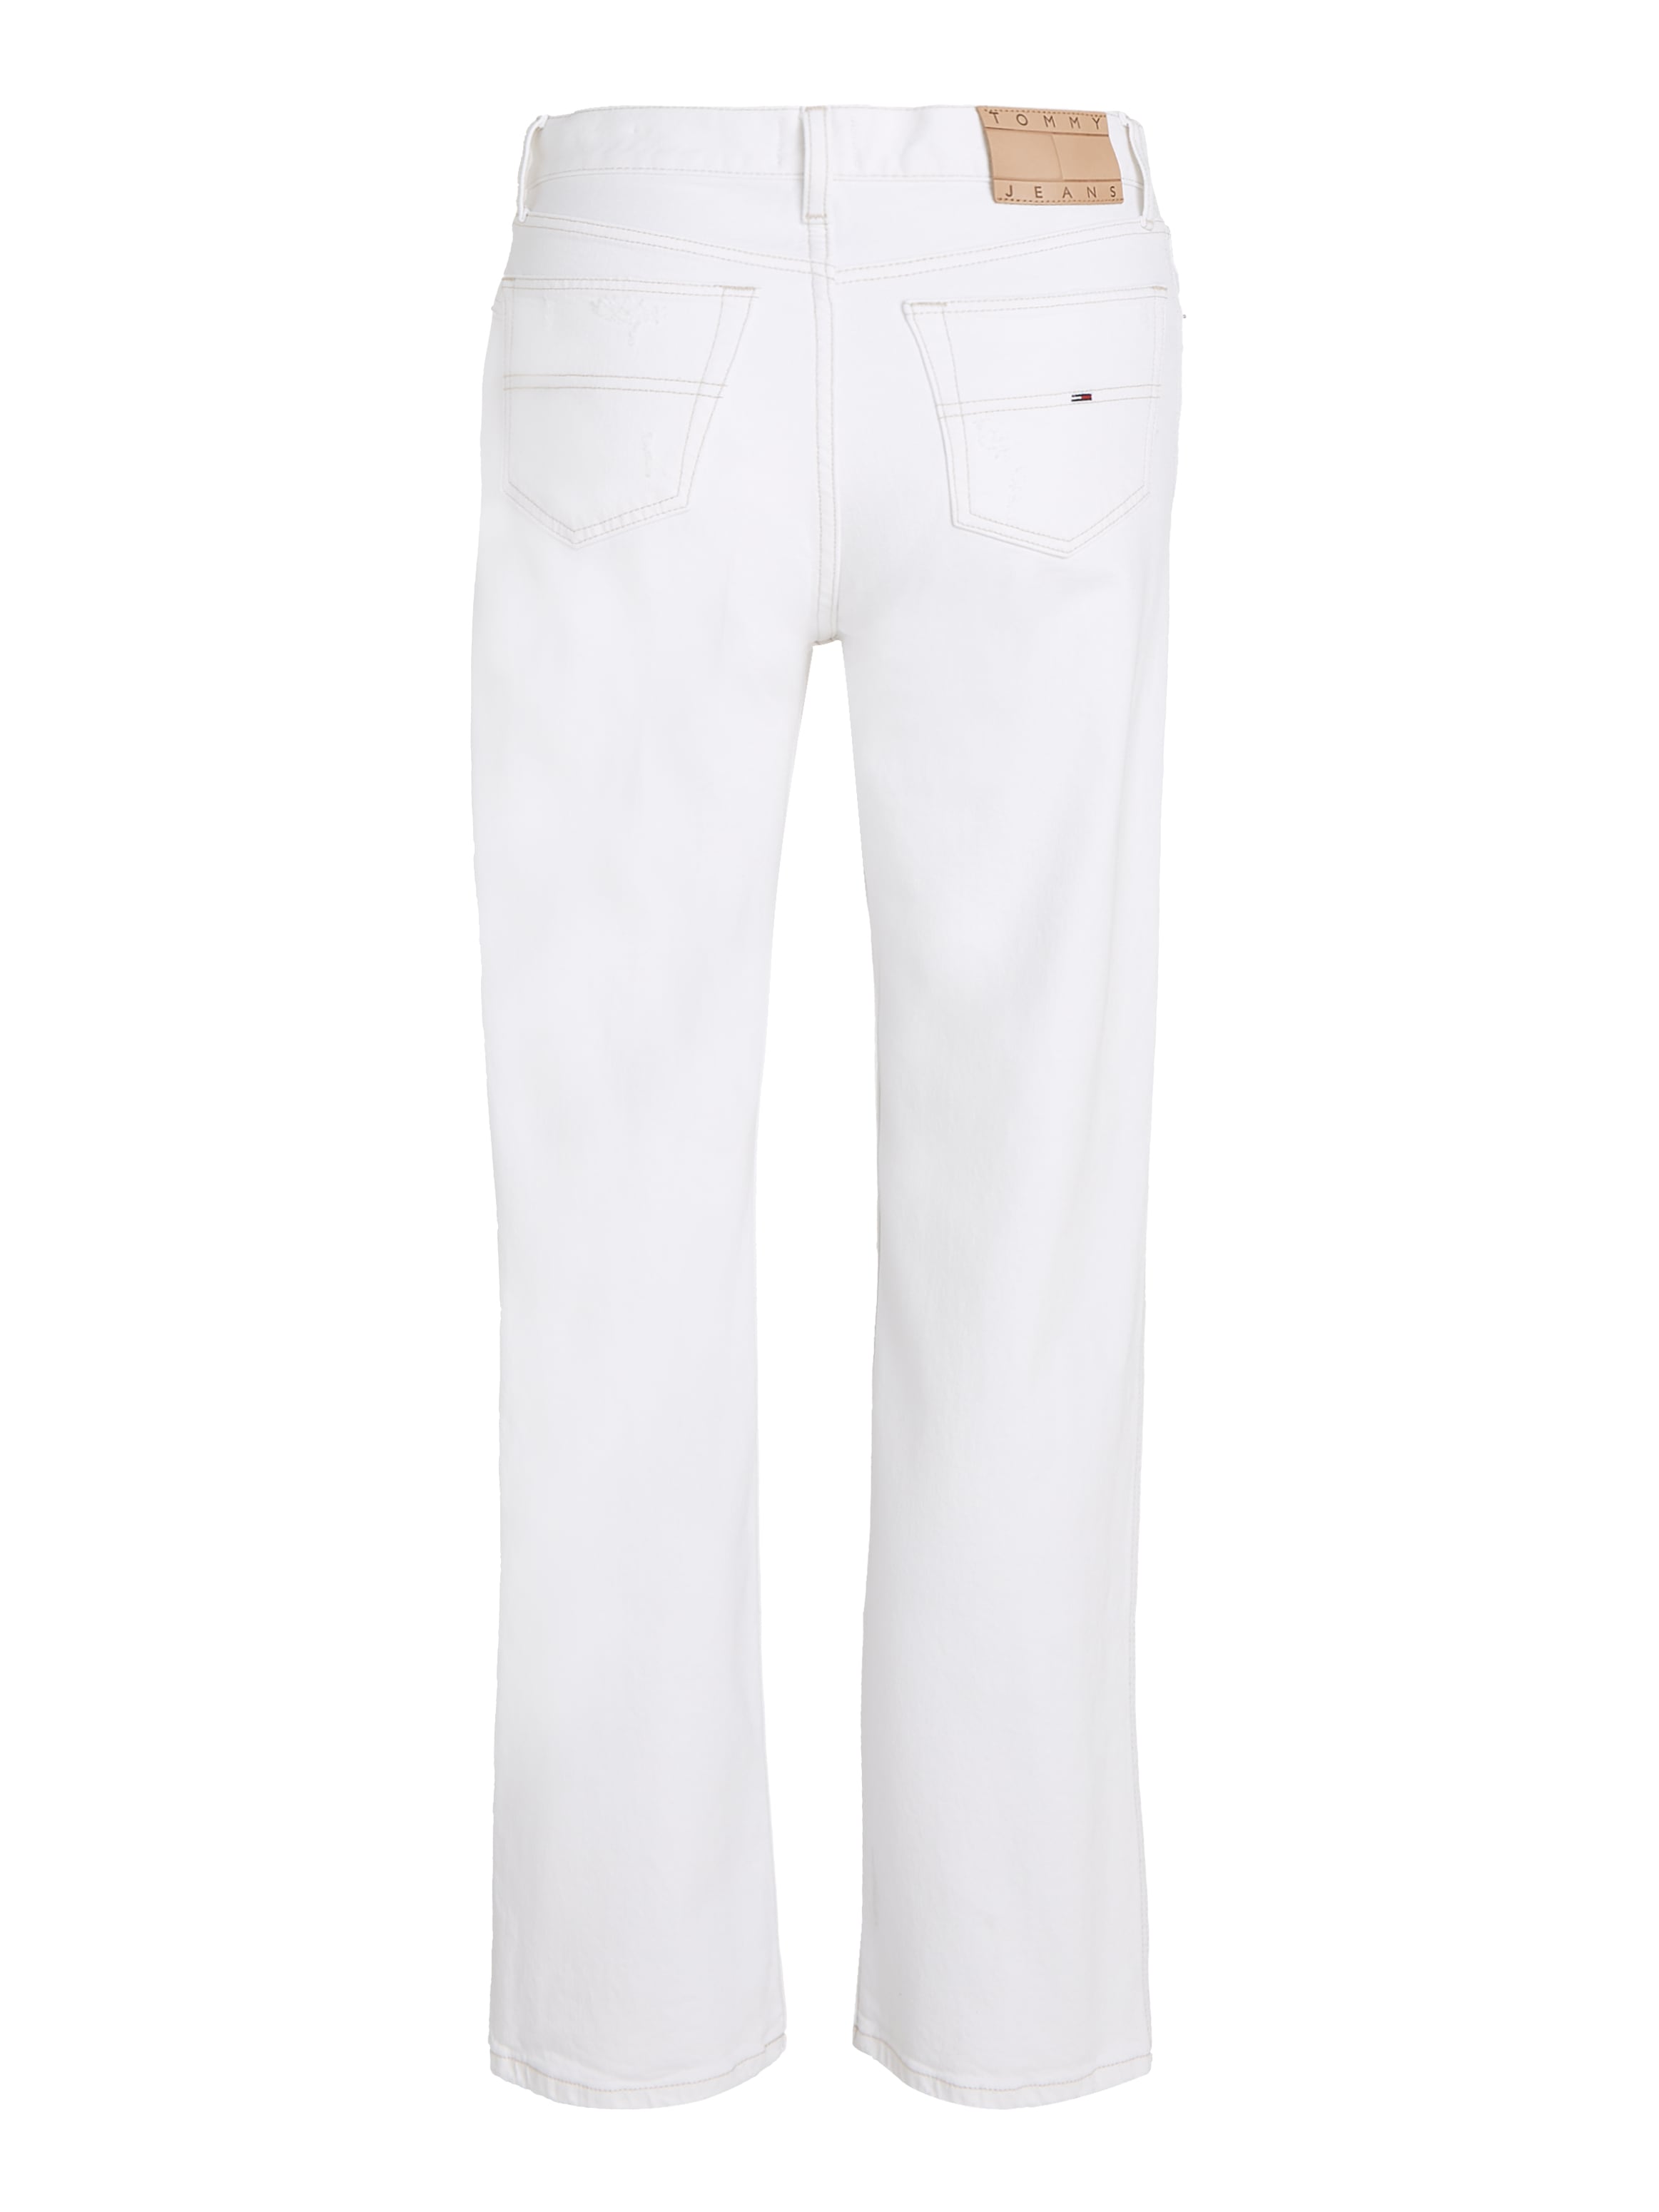 Weite Jeans Tommy »BETSY OTTOversand MD im CG4136«, LS Jeans Pocket bei Five Style